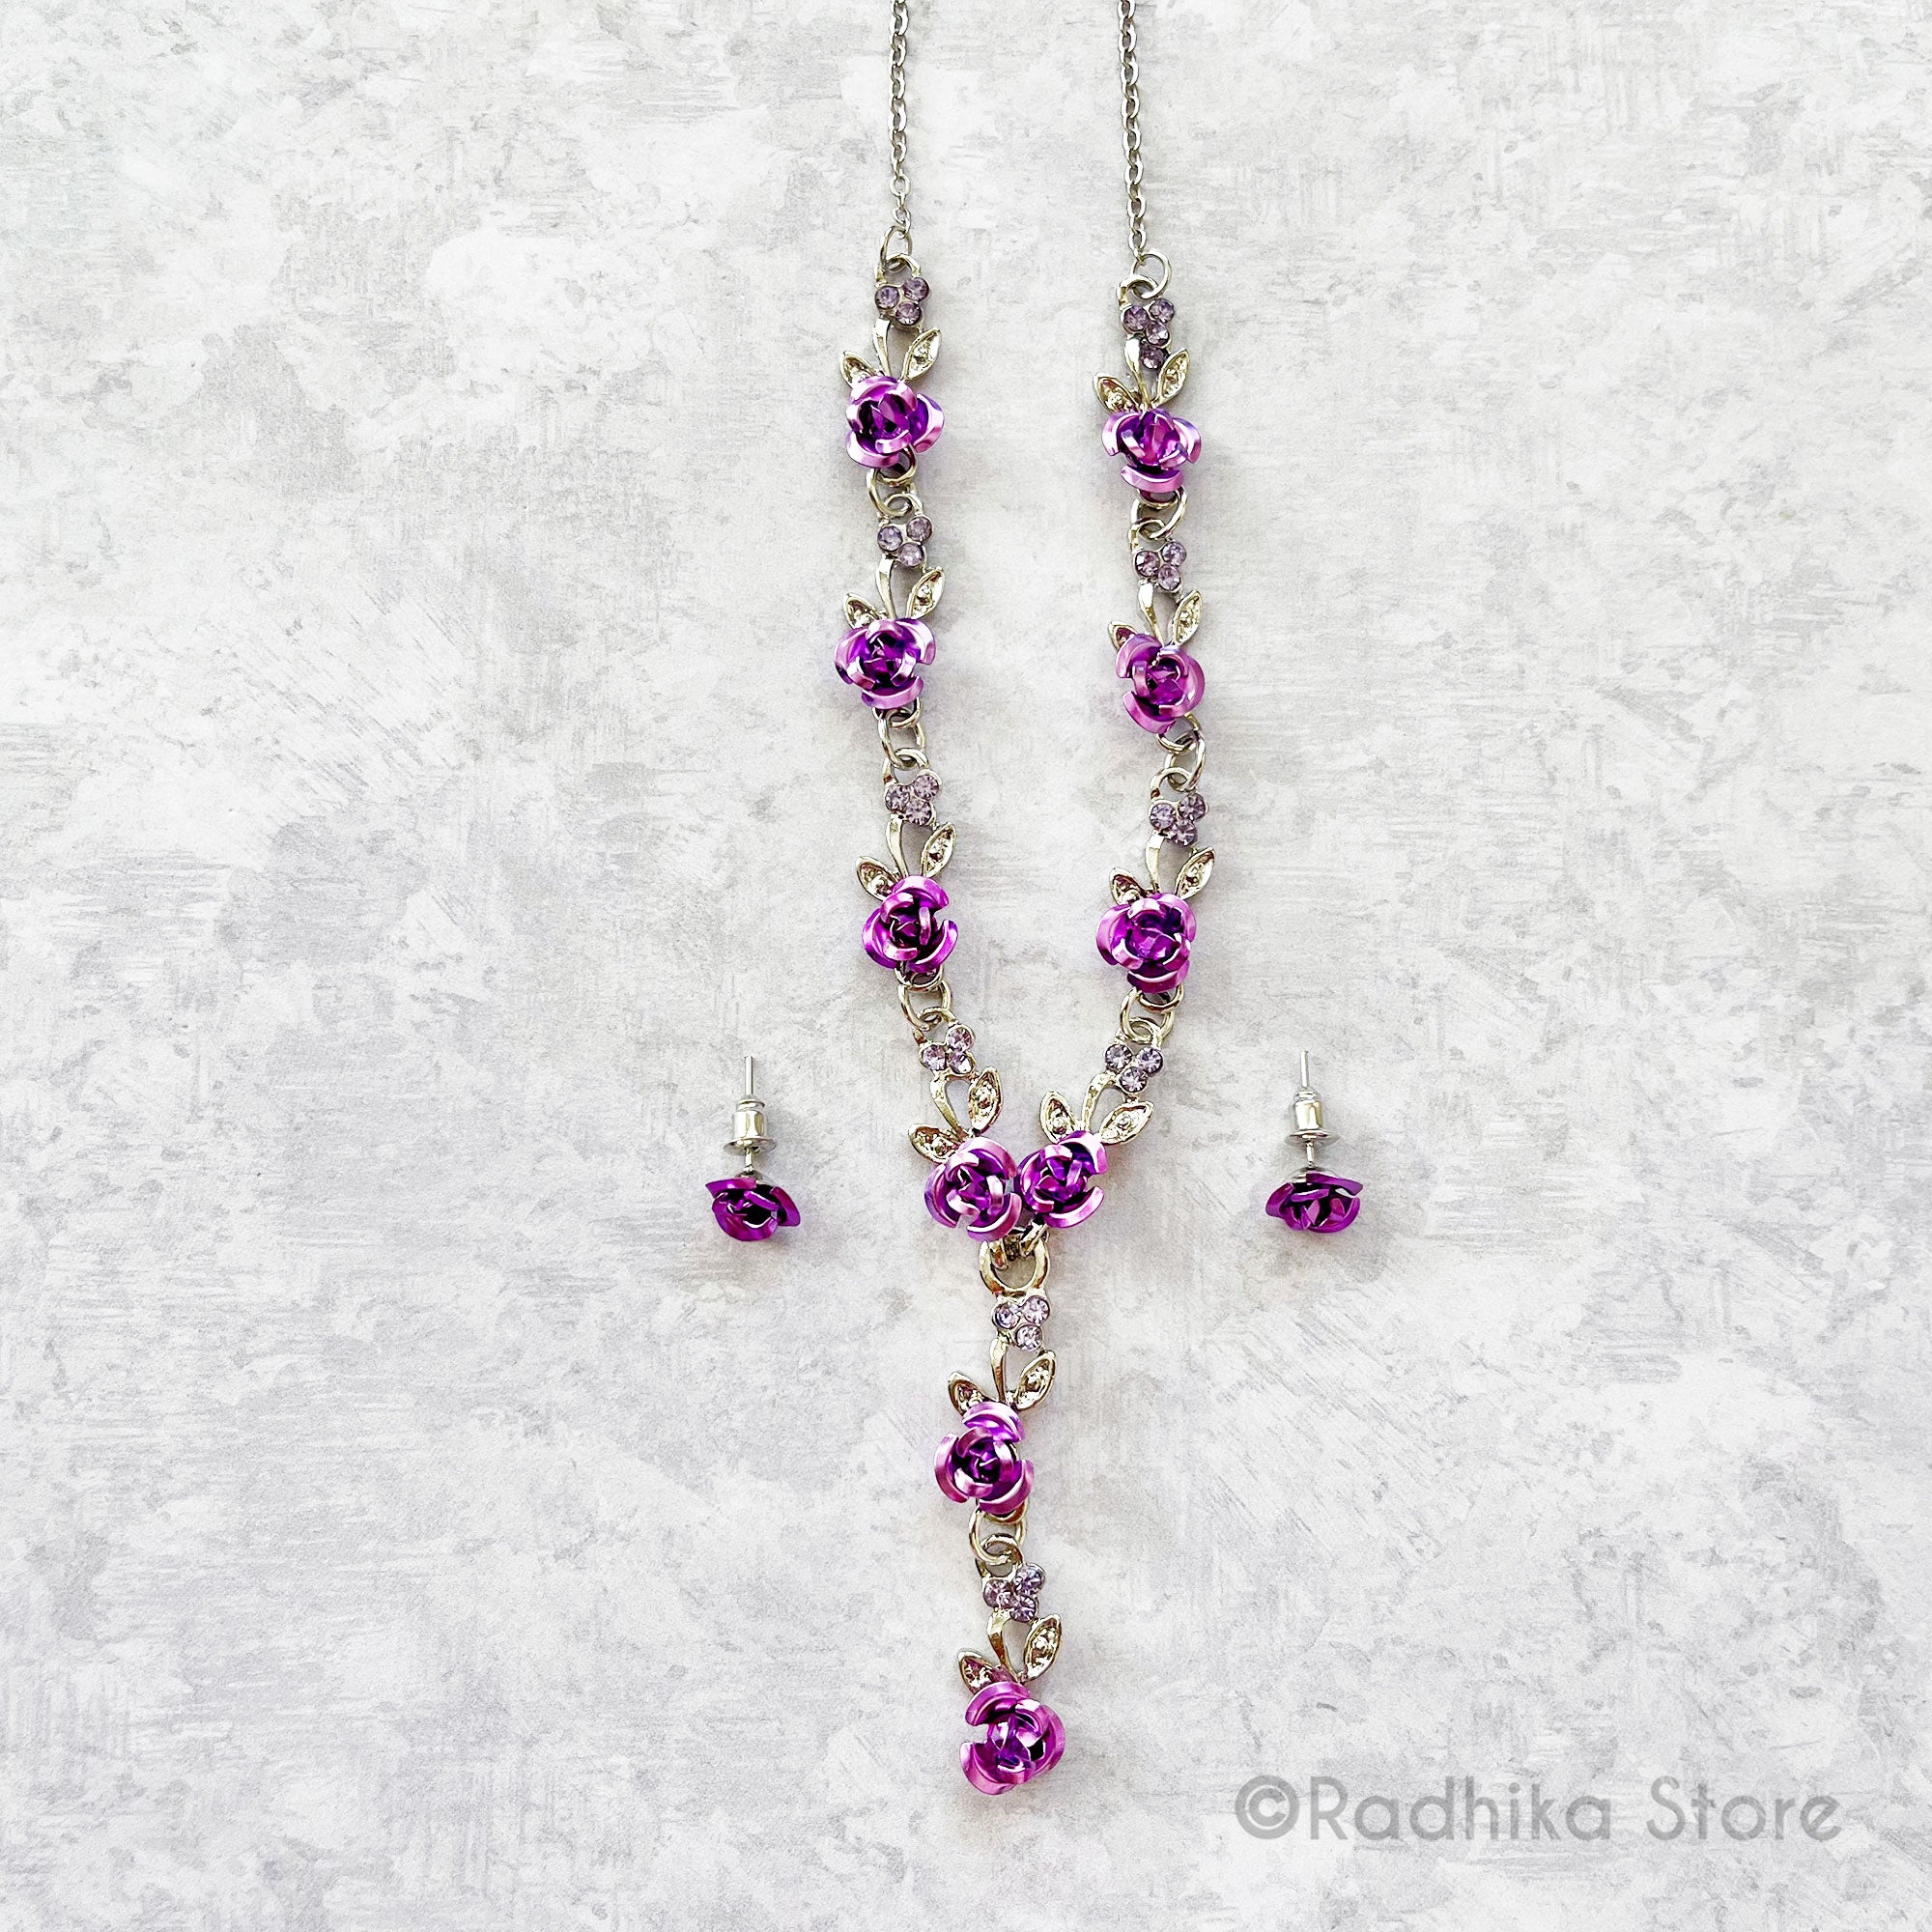 Purple Rose With Silver Vine- 8 Inch - Deity Necklaces and Earring Set